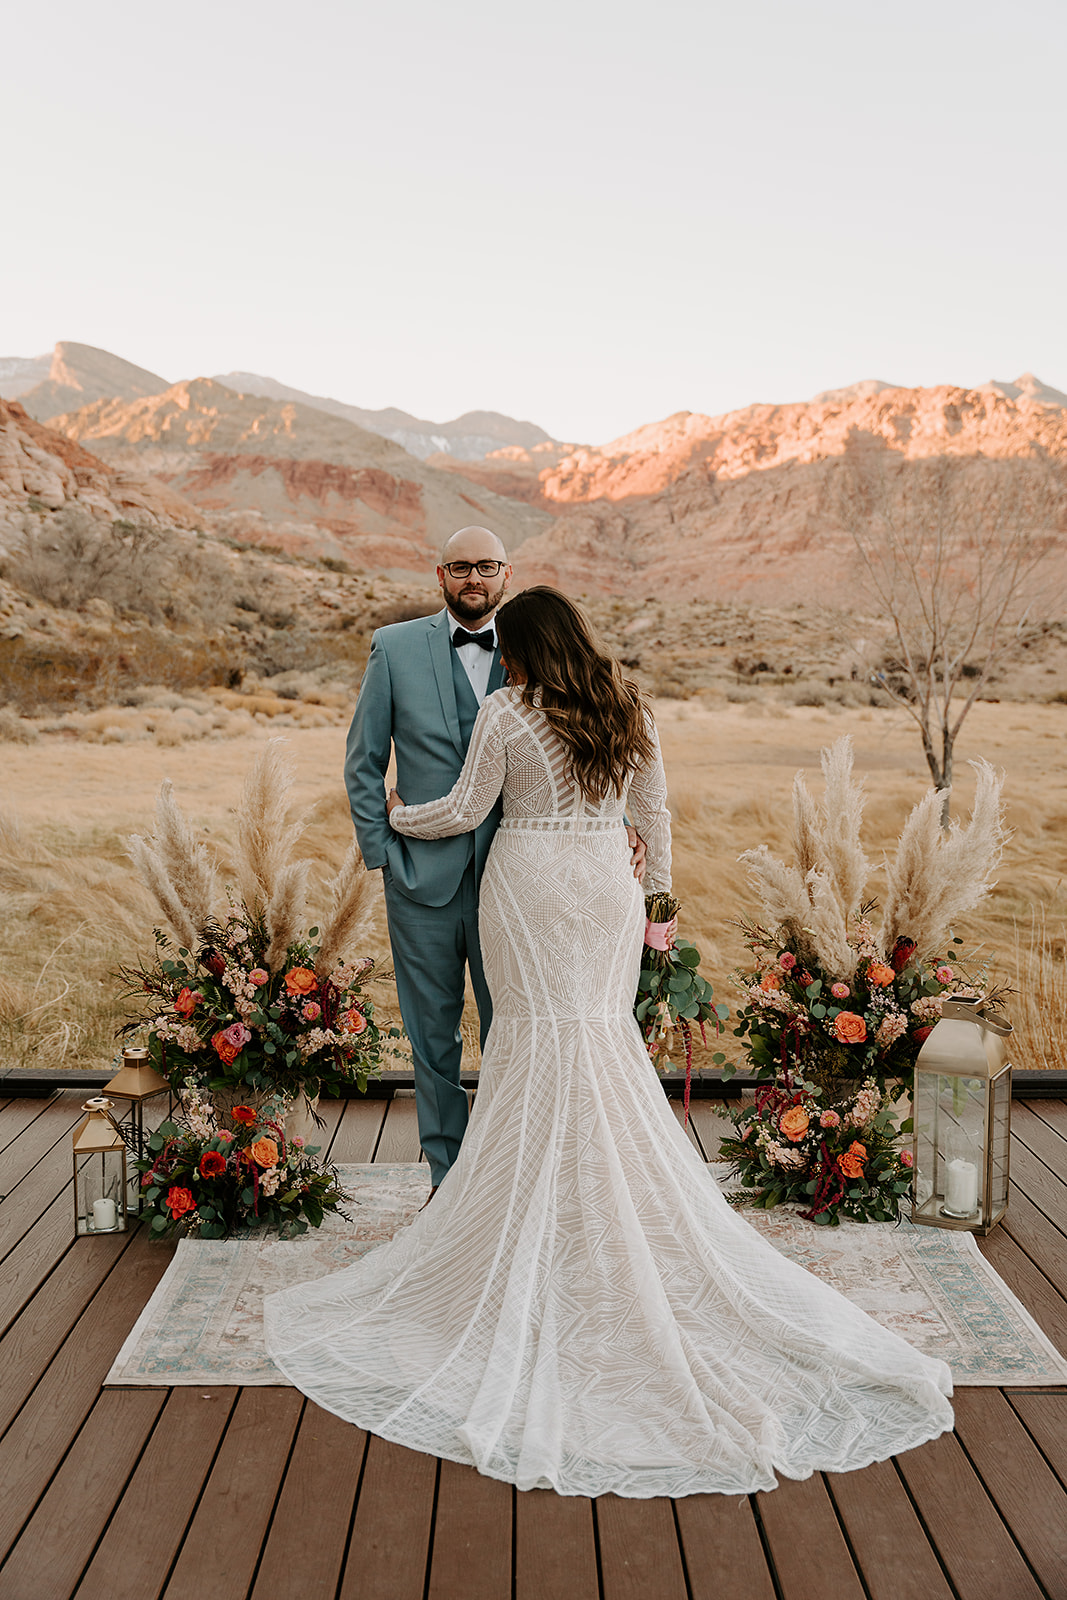 Couple posing with their decor and wedding ceremony setup designed by Elopement Las Vegas